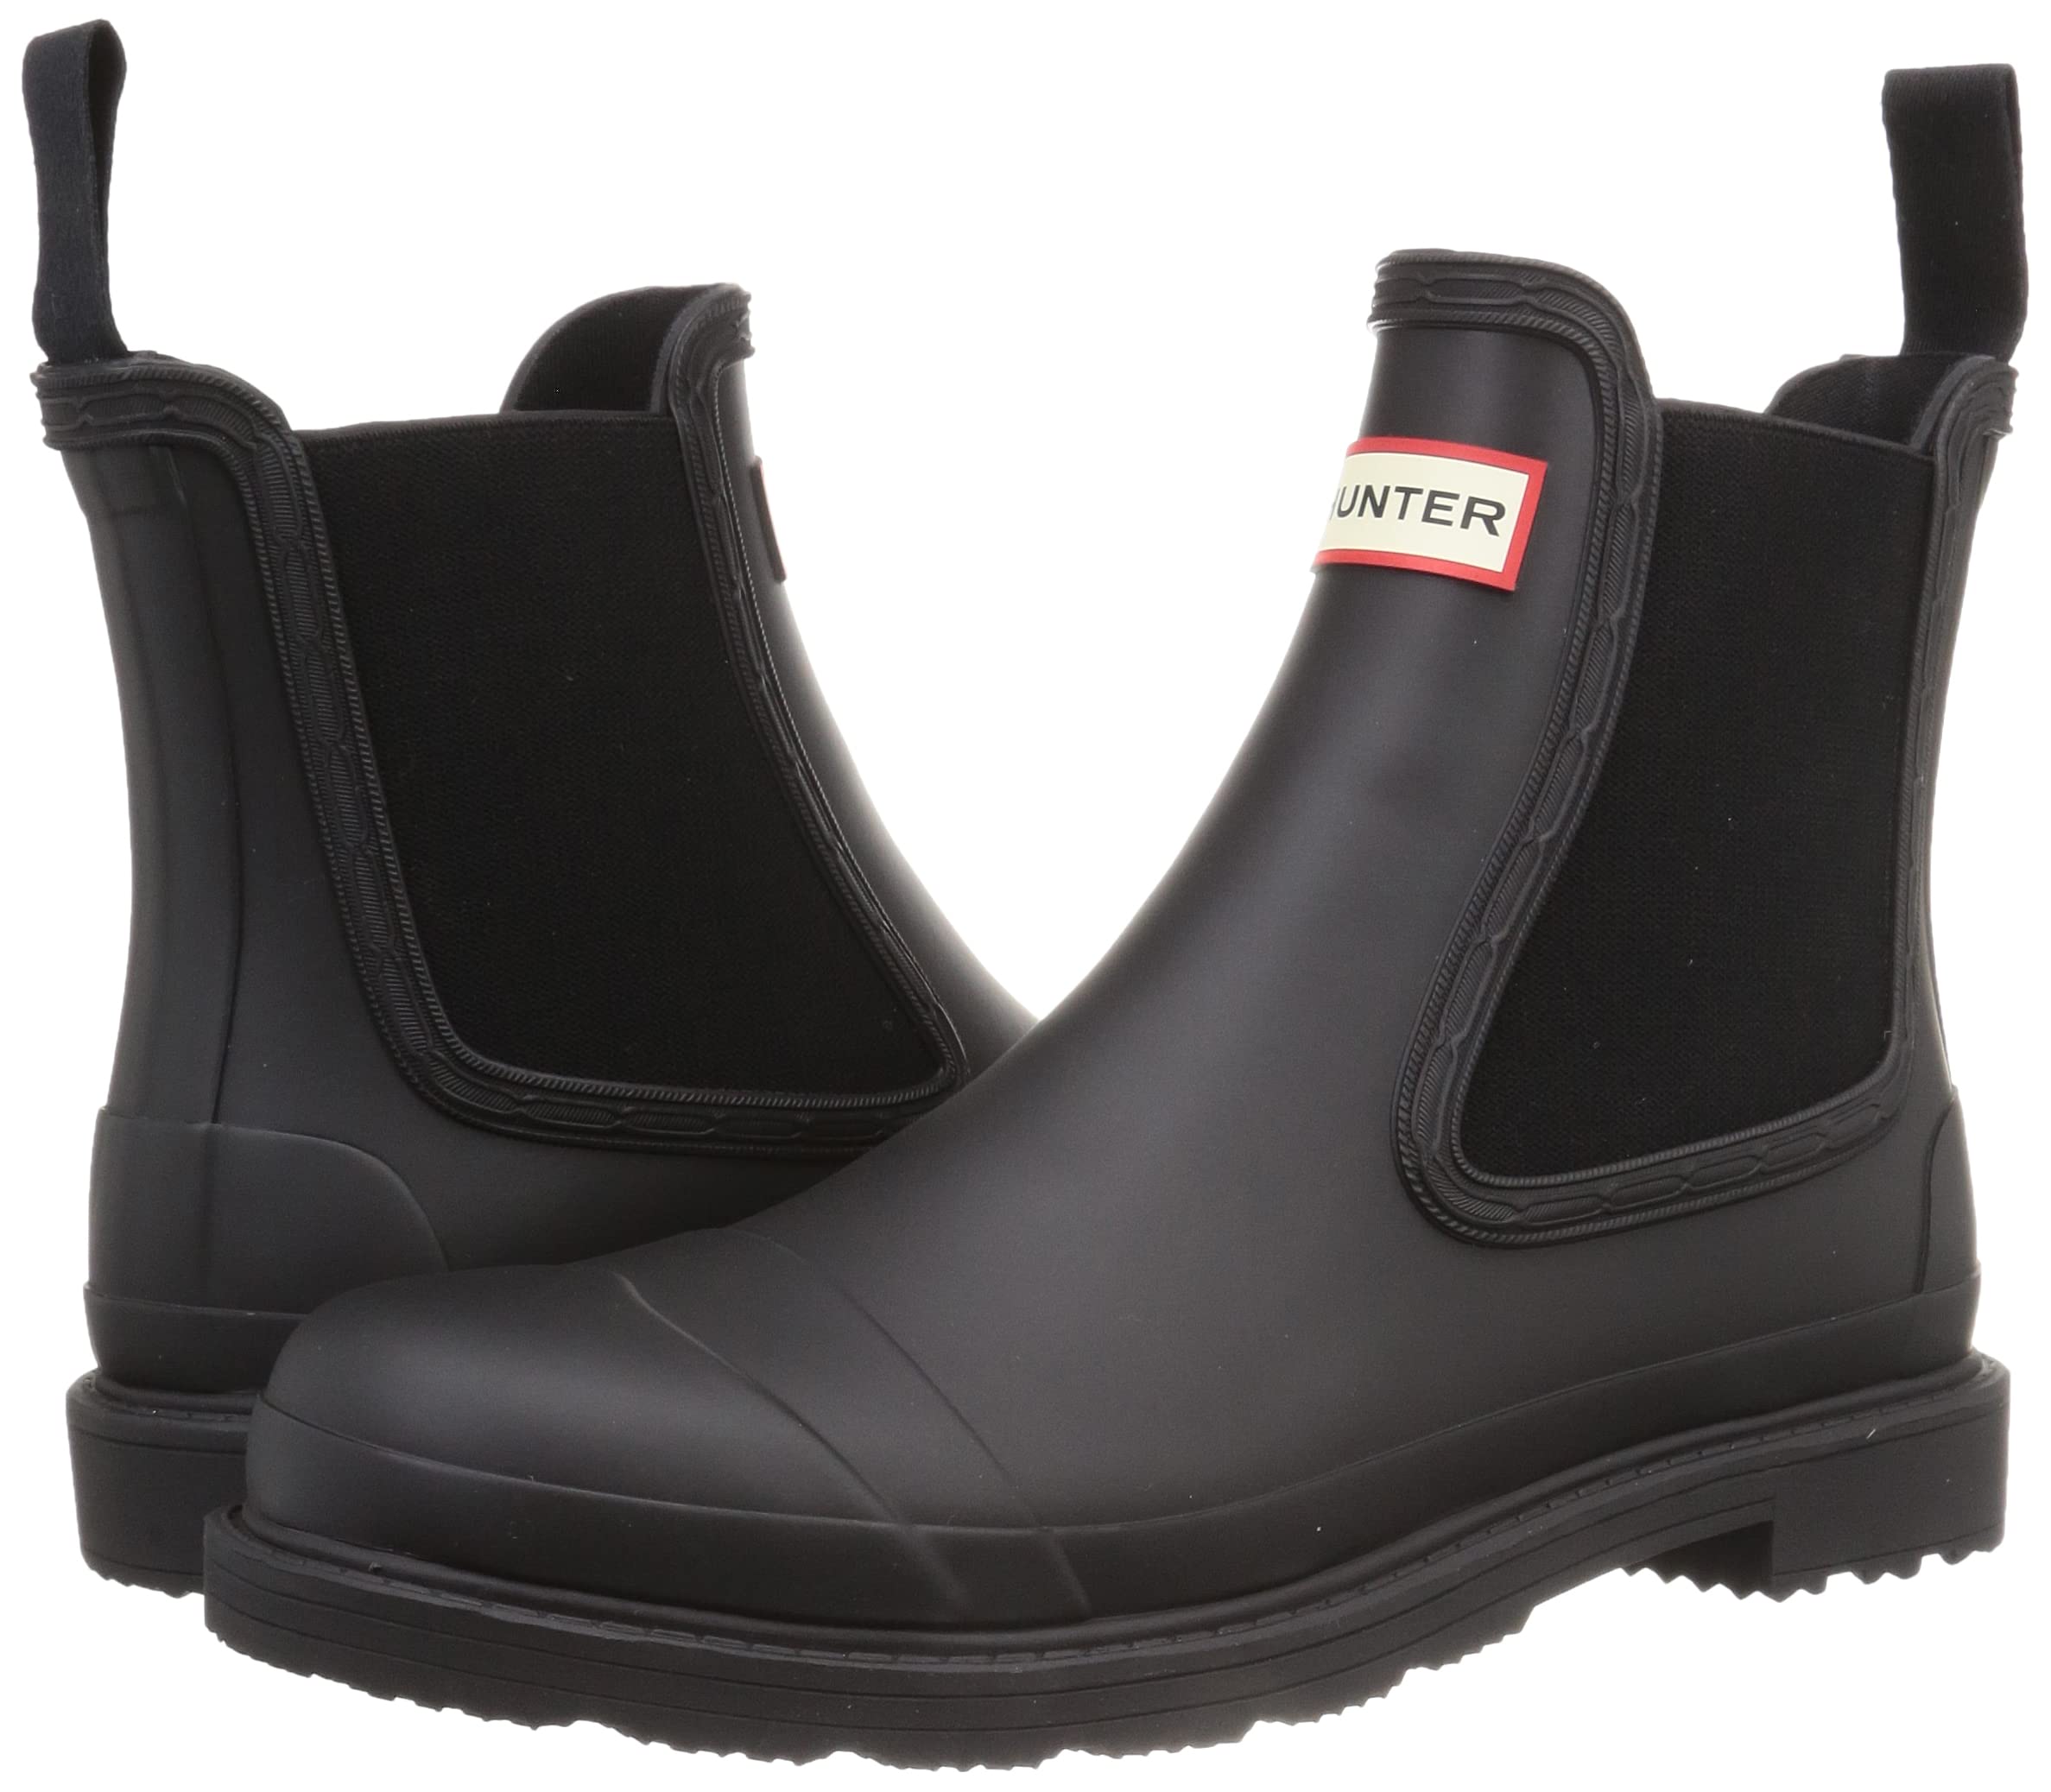 Hunter Commando Chelsea Boot for Men - Waterproof, Matte Finish, and Rubber Outsole Shoes